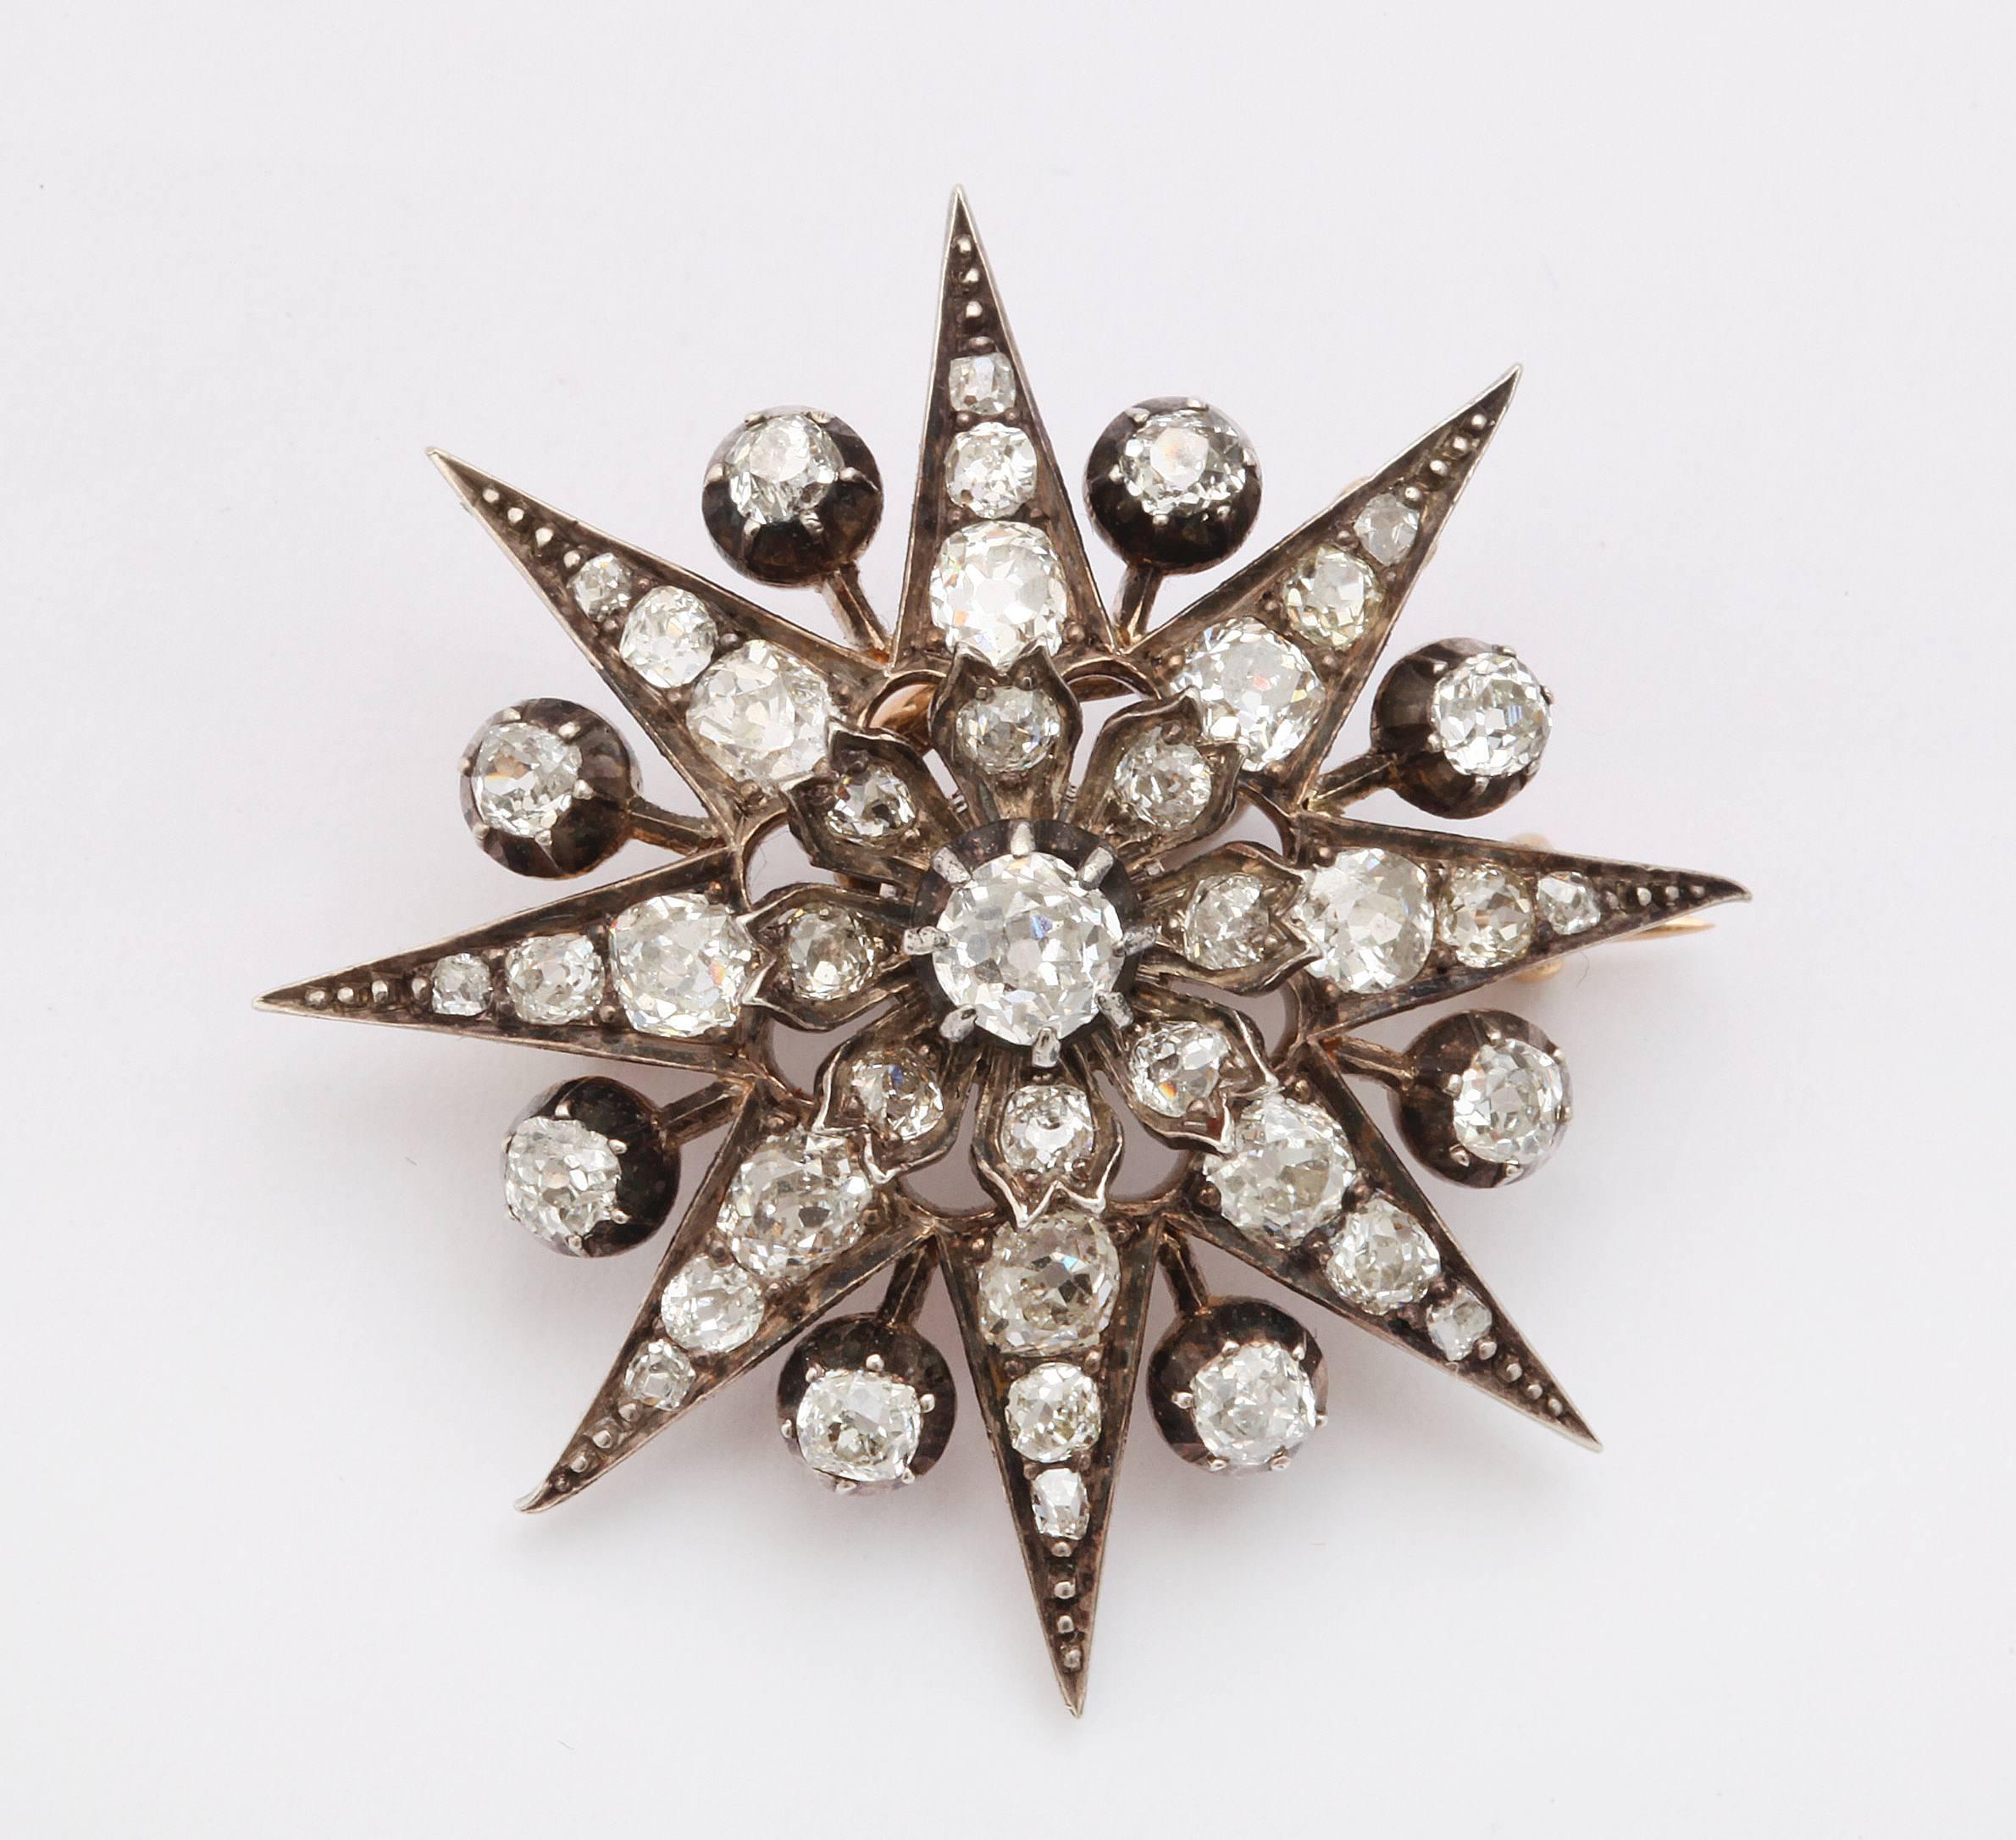 A  Victorian treasured star pendant, the face completely covered with conservatively 3.00 cts of antique old mine diamonds, is made in the clever Victorian convertible manner . The bale folds behind the star and the pin section unscrews so that the